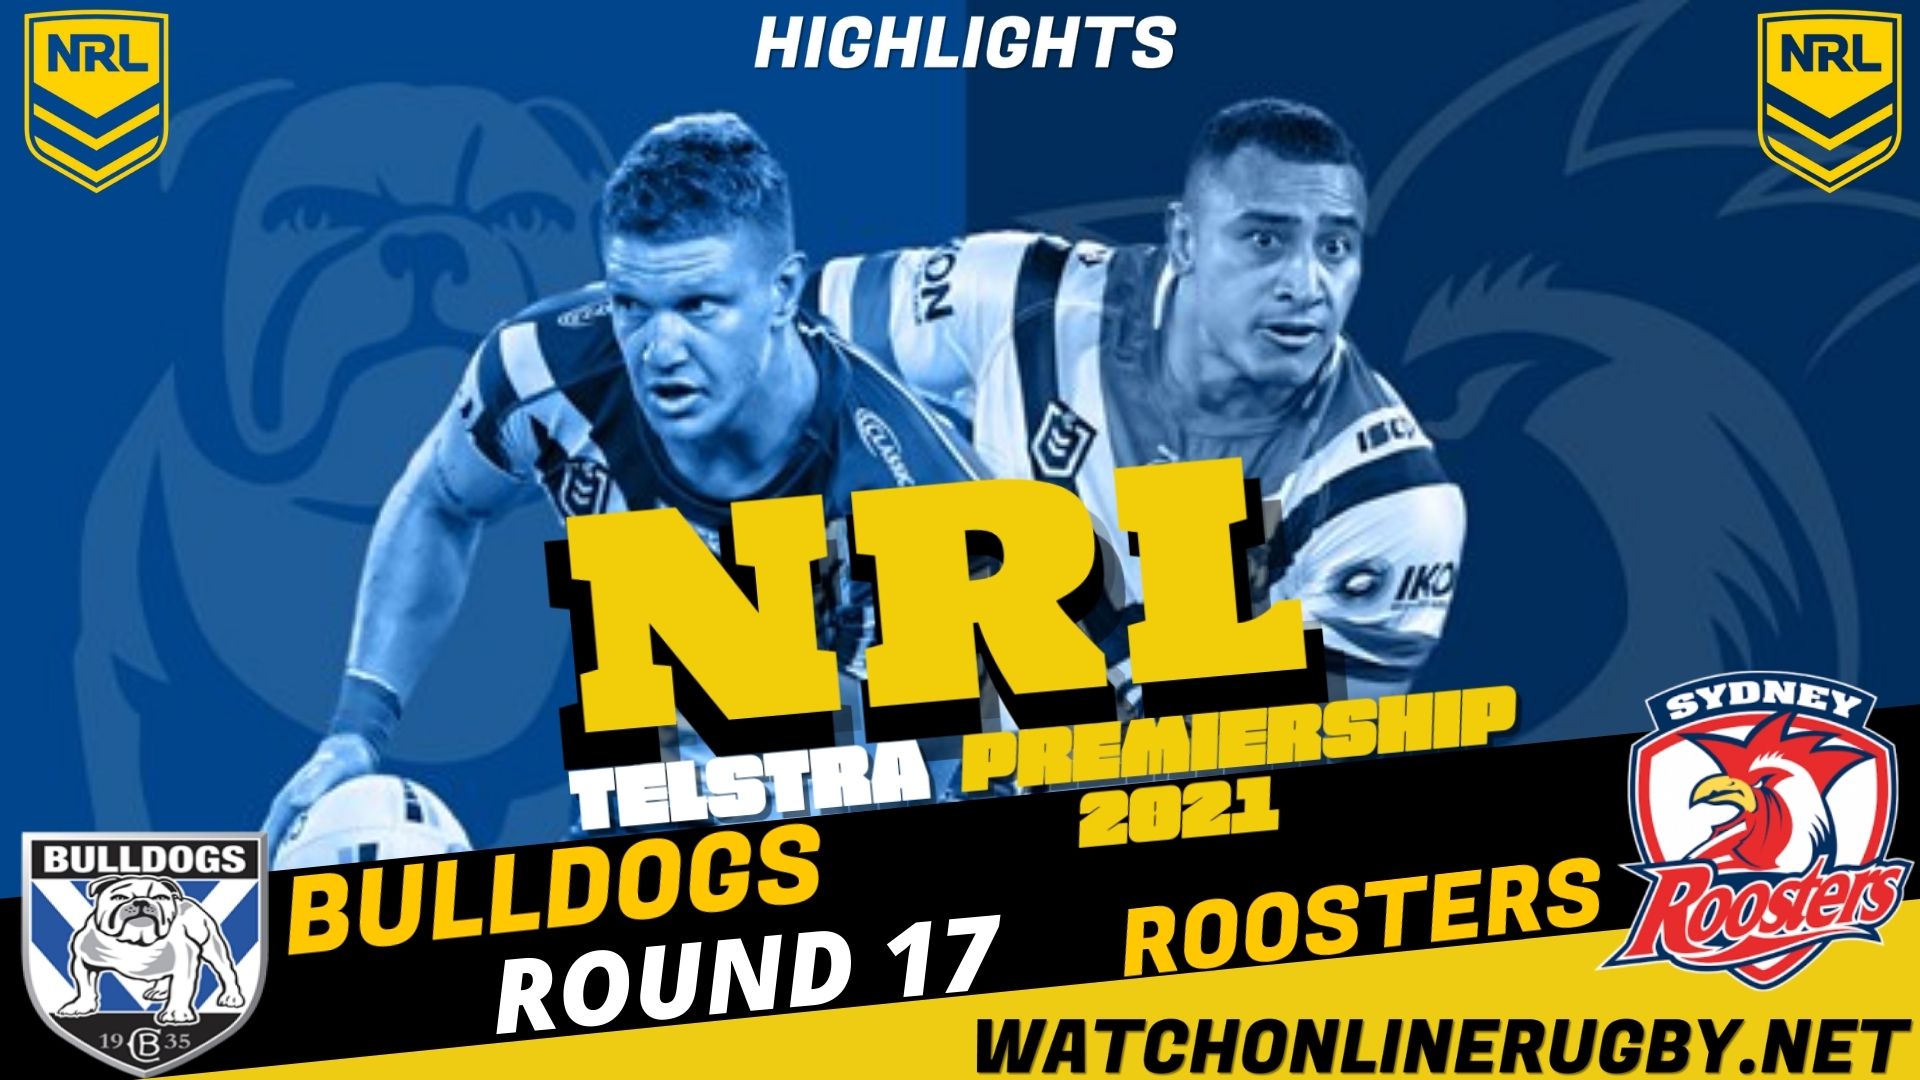 Bulldogs Vs Roosters Highlights RD 17 NRL Rugby